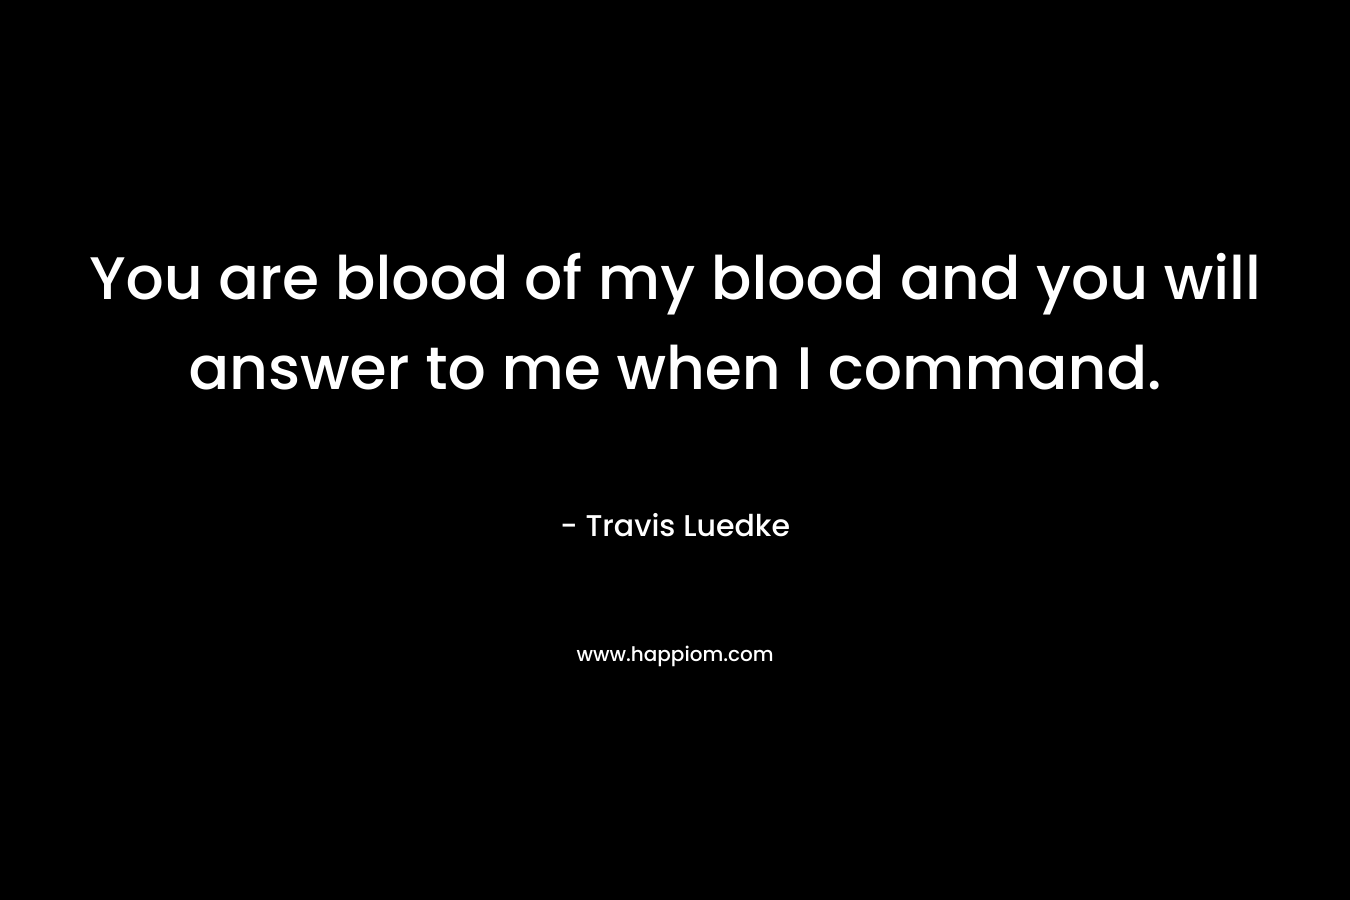 You are blood of my blood and you will answer to me when I command.